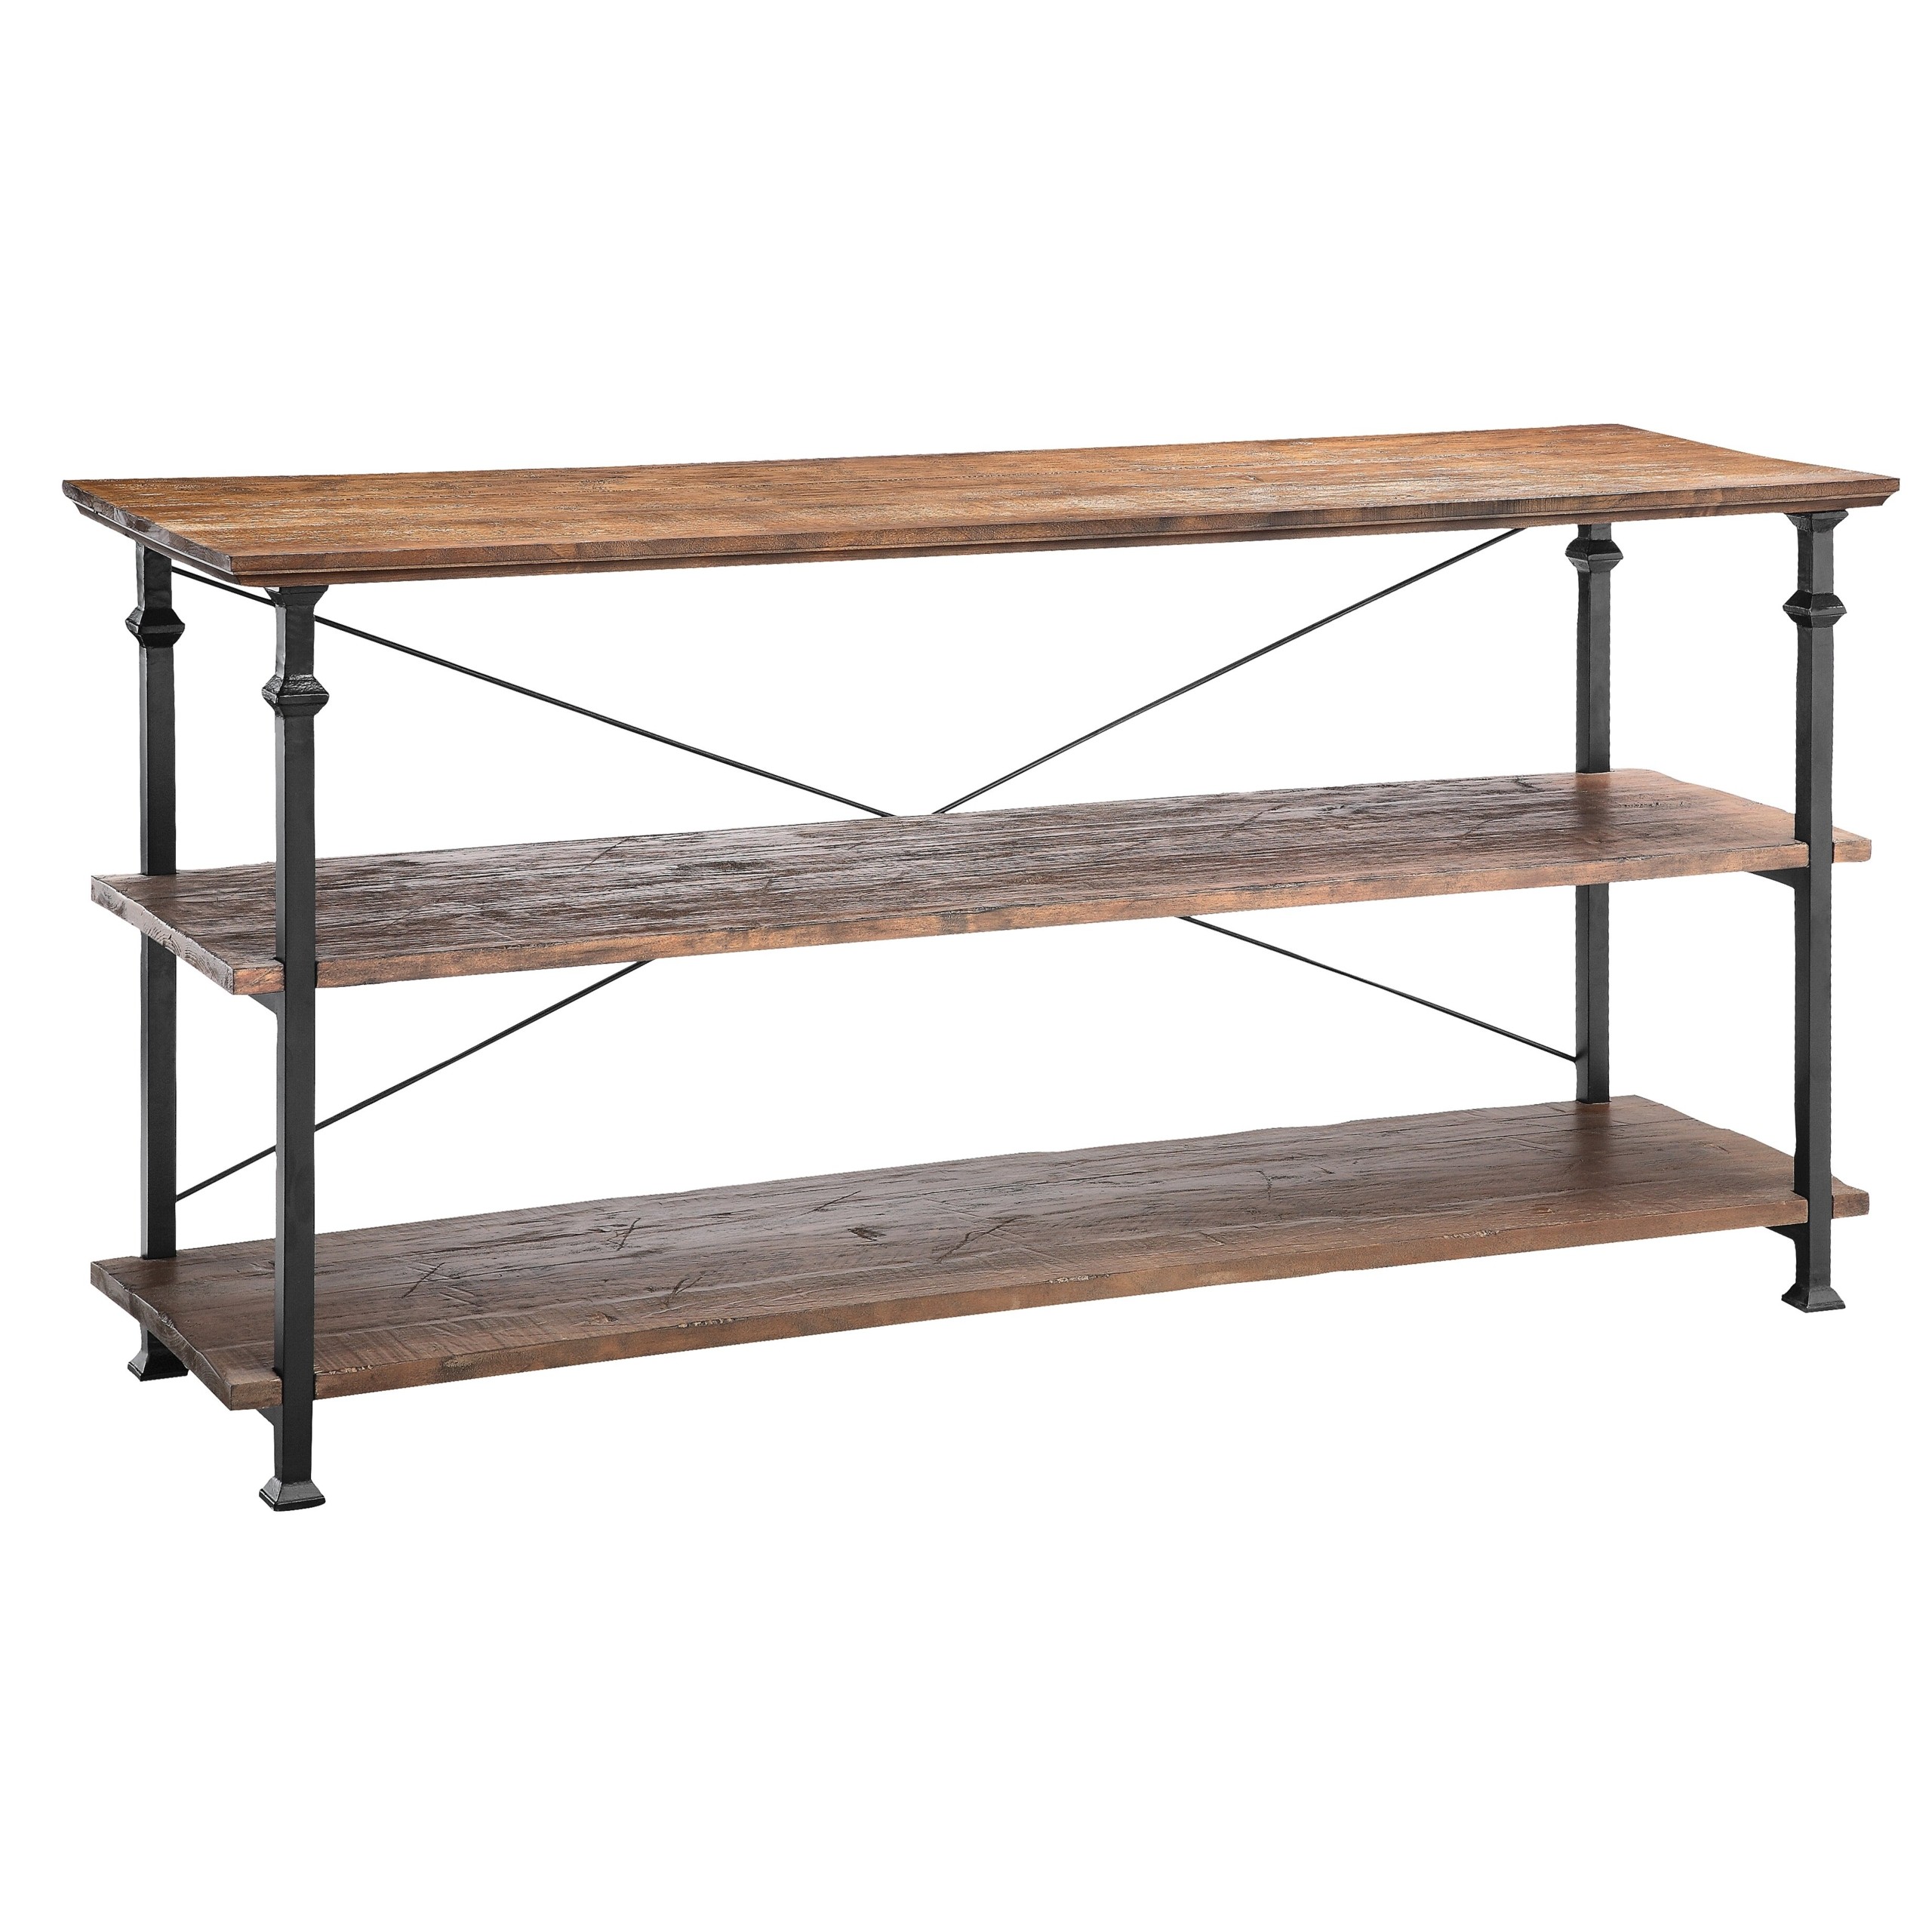 Stein World Furniture Poplar Estates Metal Console Table, Natural Reclaimed Wood